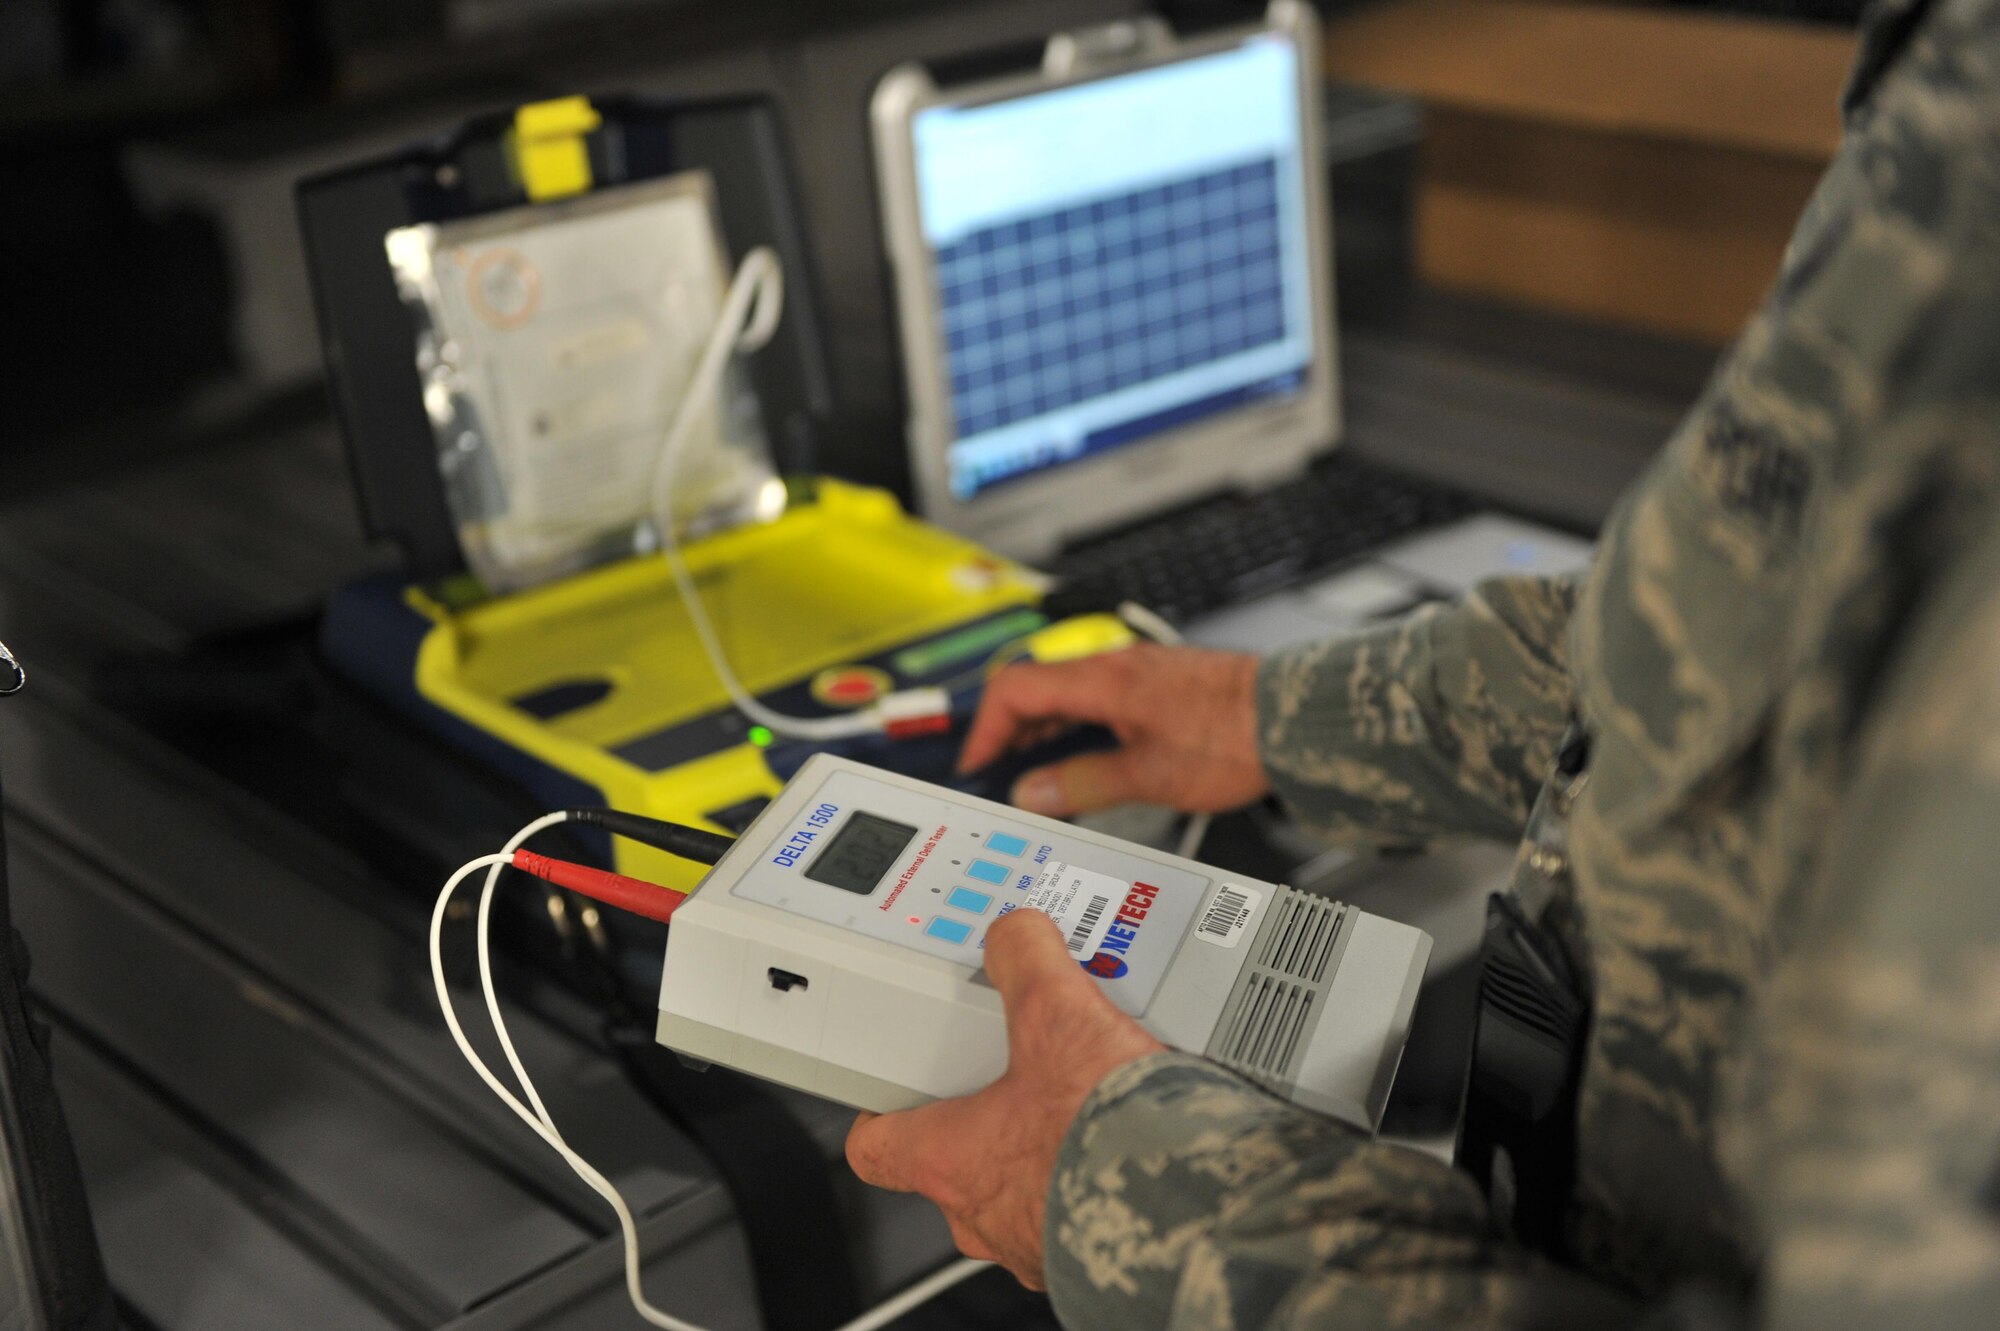 U.S. Air Force Tech. Sgt. Christian Bond, 97th Medical Group bioenvironmental medical equipment technician, tests an automated external defibrillator as part of routine maintenance on the devices inside medical group warehouse at Altus Air Force Base, Oklahoma, Aug. 13, 2015. Every AED device on base is supplied and maintained by the logistics flight to ensure safety for personnel. (U.S. Air Force photo by Senior Airman Dillon Davis)